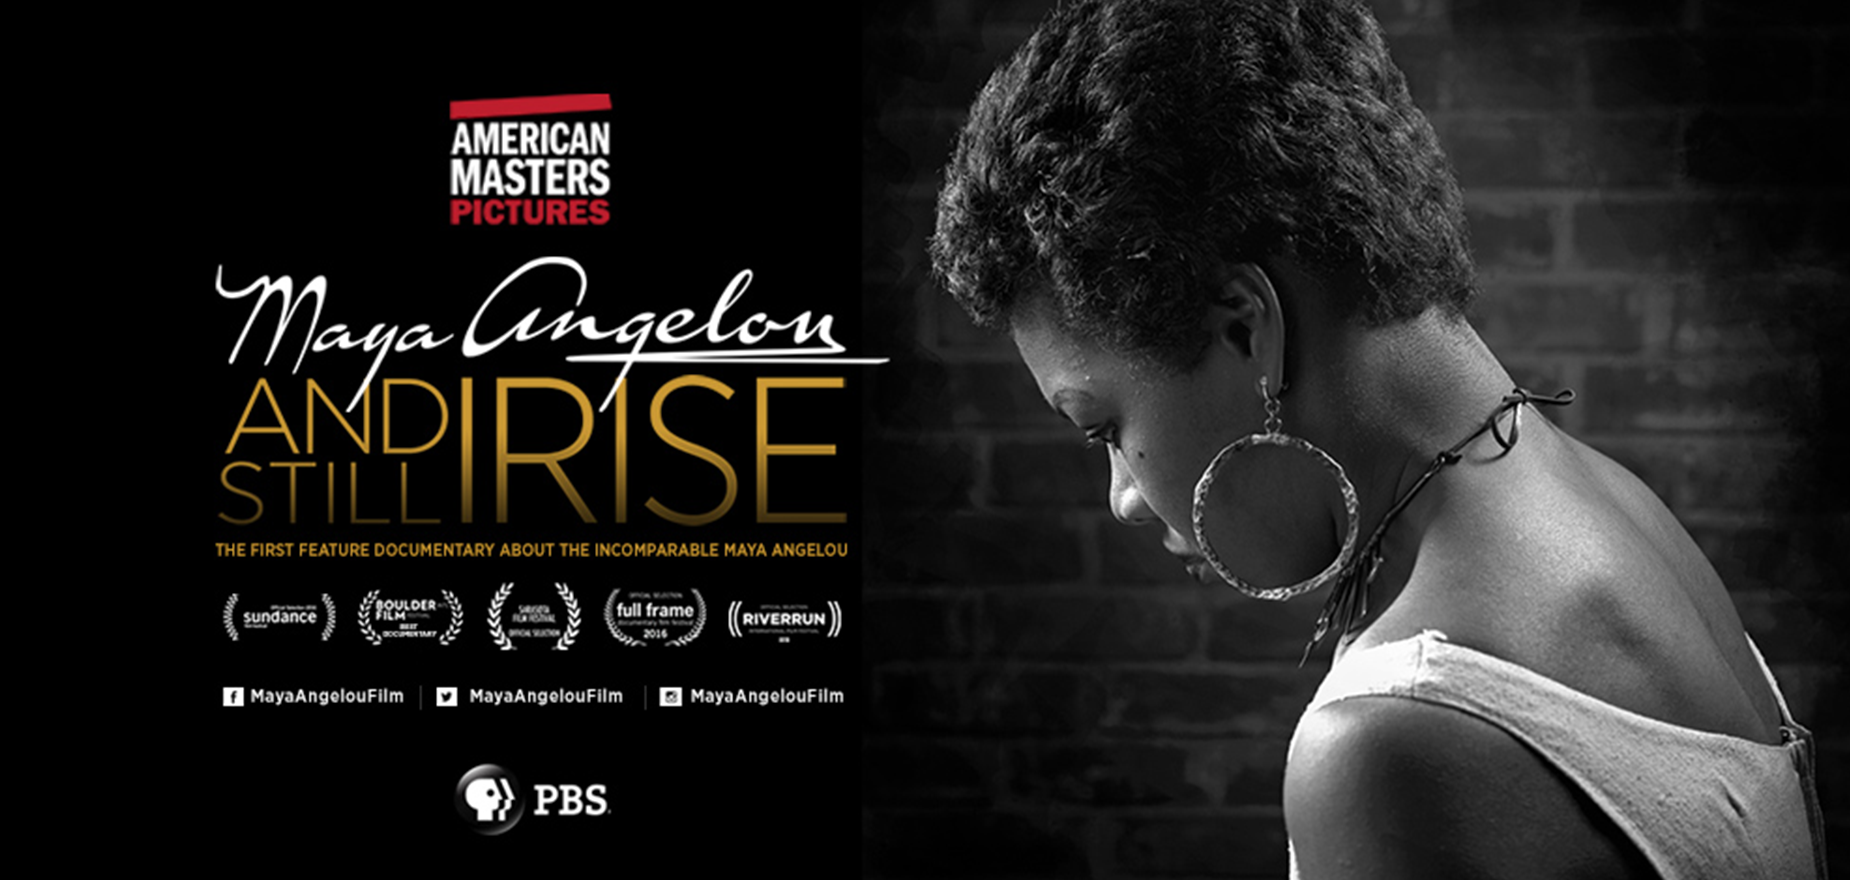 American Masters: Maya Angelou: And Still I Rise - The People's Poet Media Group, LLC, THIRTEEN's AMERICAN MASTERS for WNET and ITVS in association with Artemis Rising